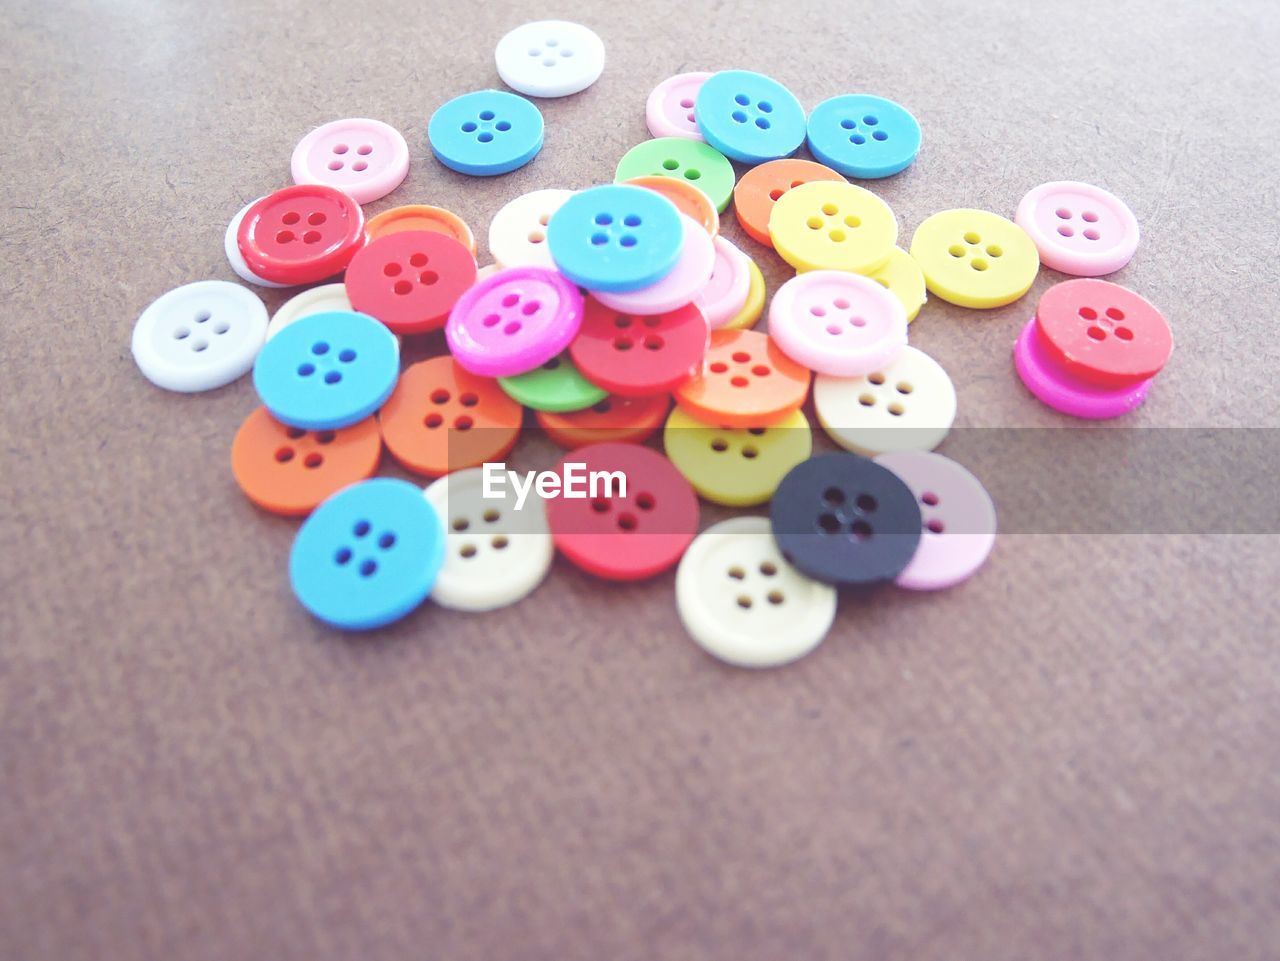 CLOSE-UP HIGH ANGLE VIEW OF MULTI COLORED BUTTONS ON PAPER